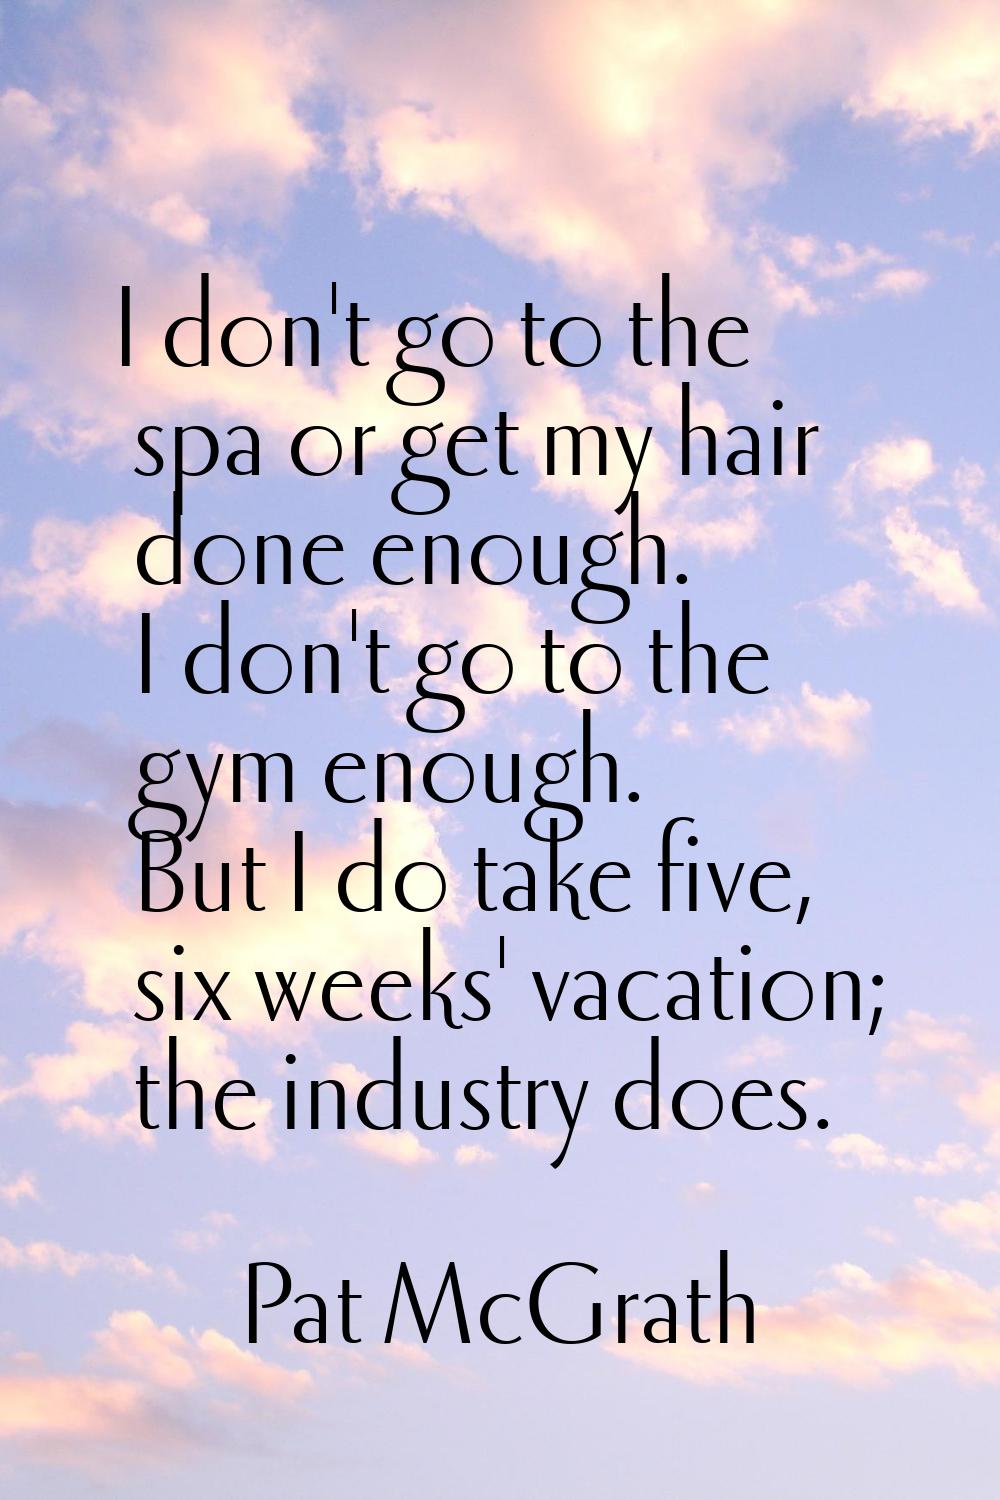 I don't go to the spa or get my hair done enough. I don't go to the gym enough. But I do take five,